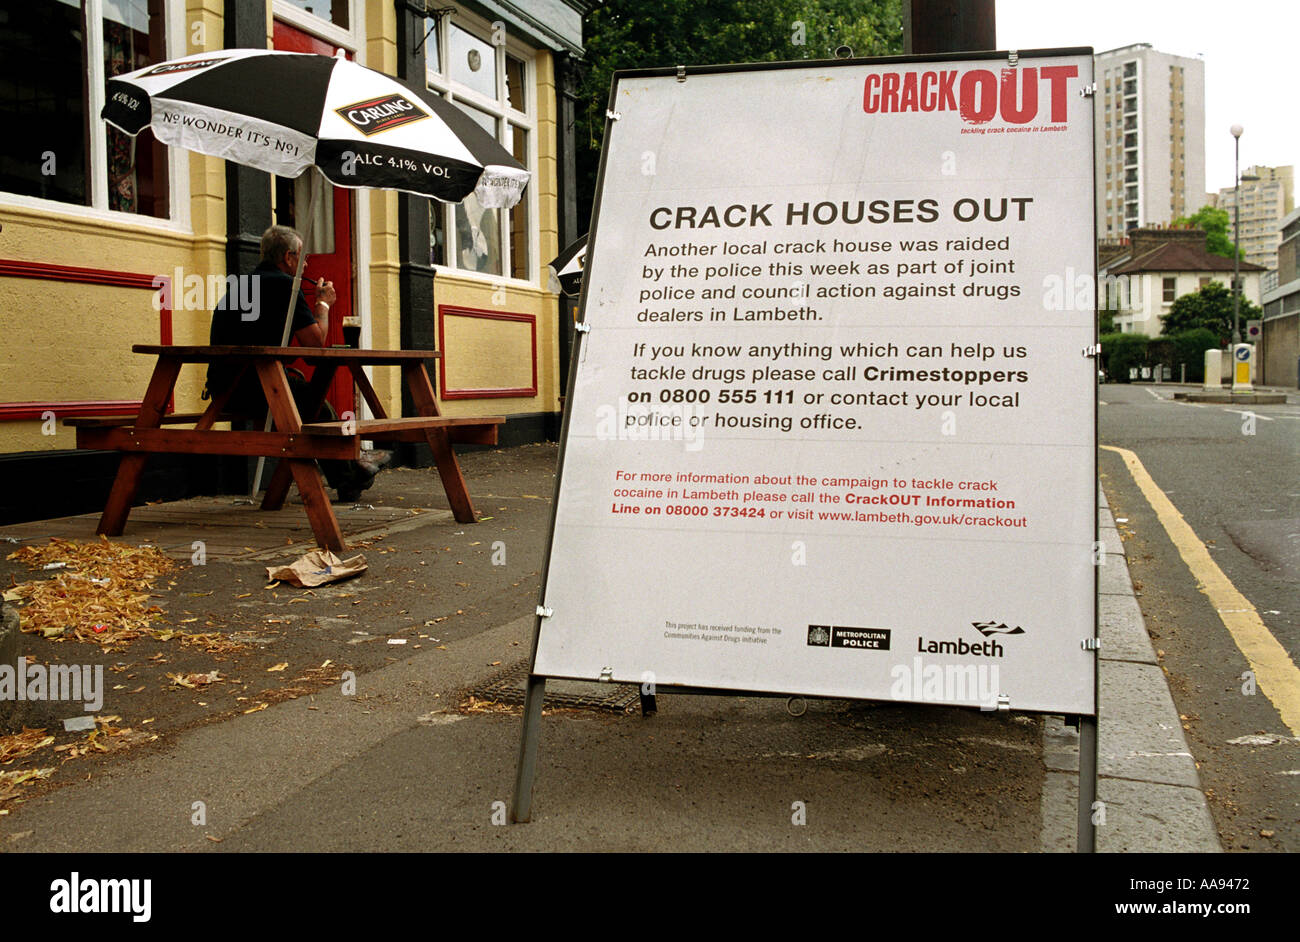 Sign boards in Lambeth South London in hope of cracking down on crack cocaine use and attempts to close down crack houses. Stock Photo